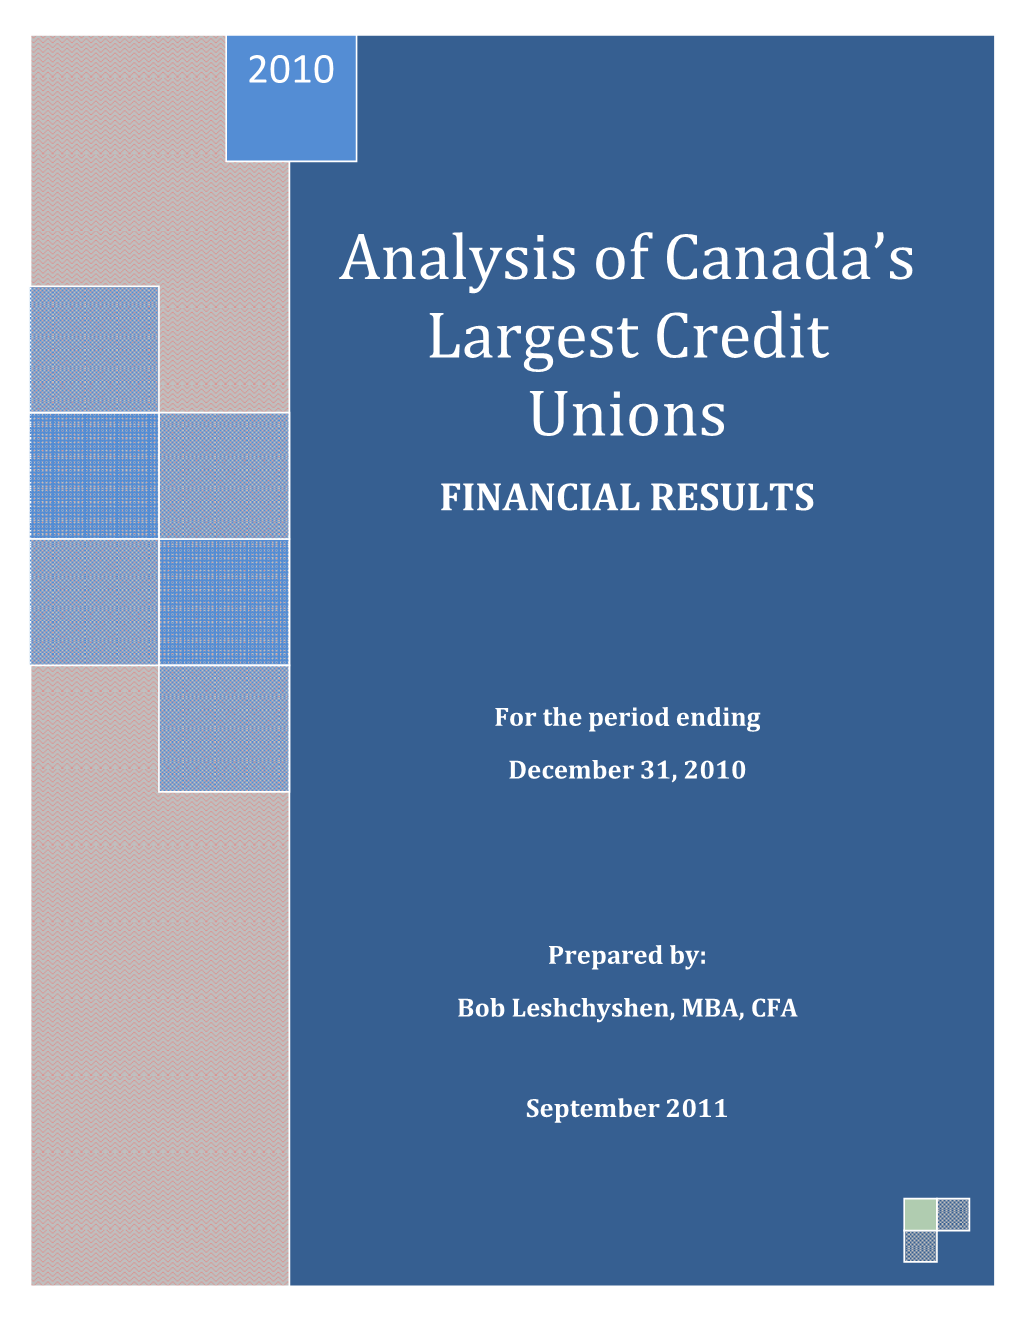 Analysis of Canada's Largest Credit Unions